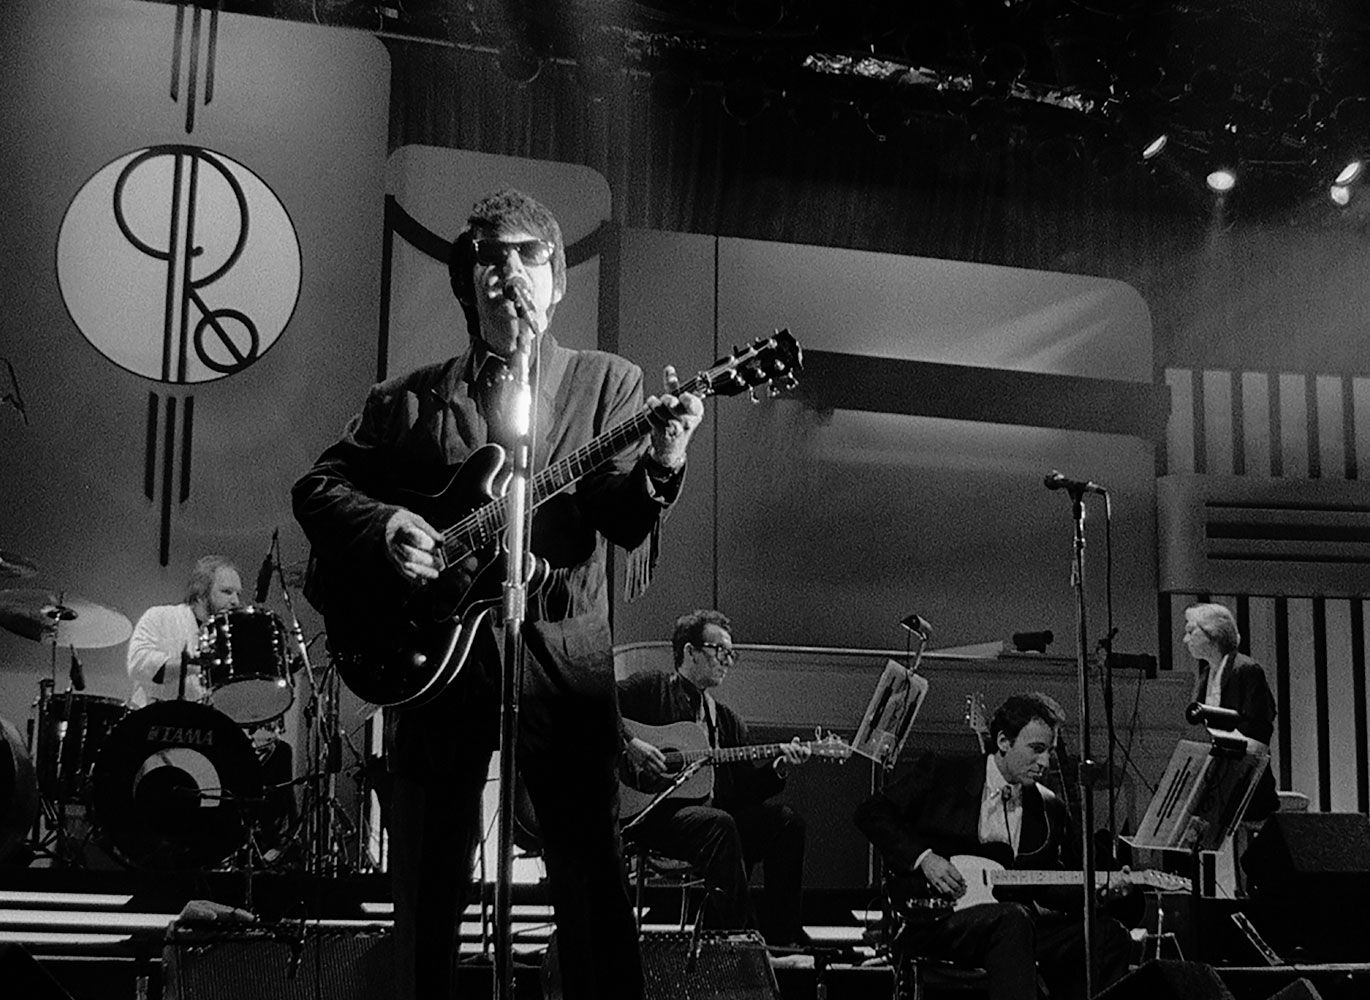 Roy Orbison in a September 1987 performance at the Cocoanut Grove in Los Angeles.